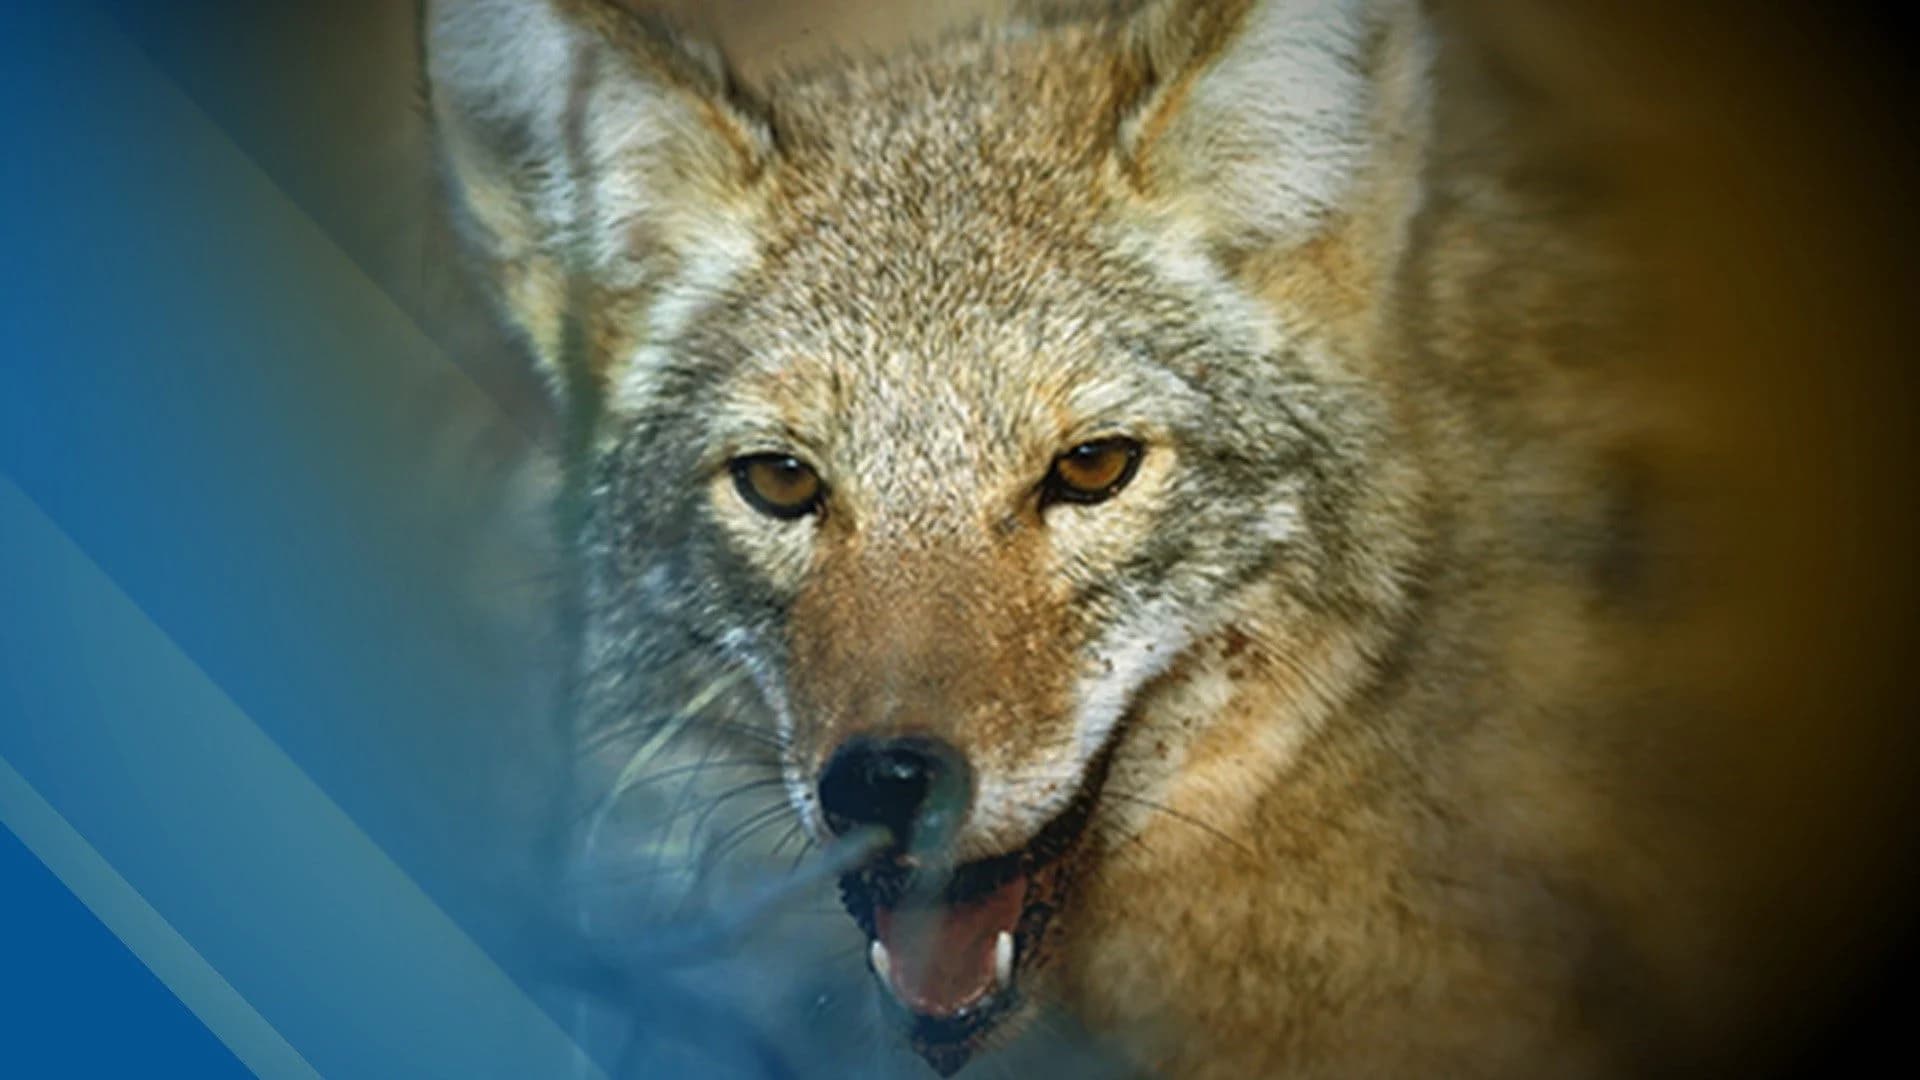 Police: Coyote mauls small dog in Piscataway; more coyotes spotted